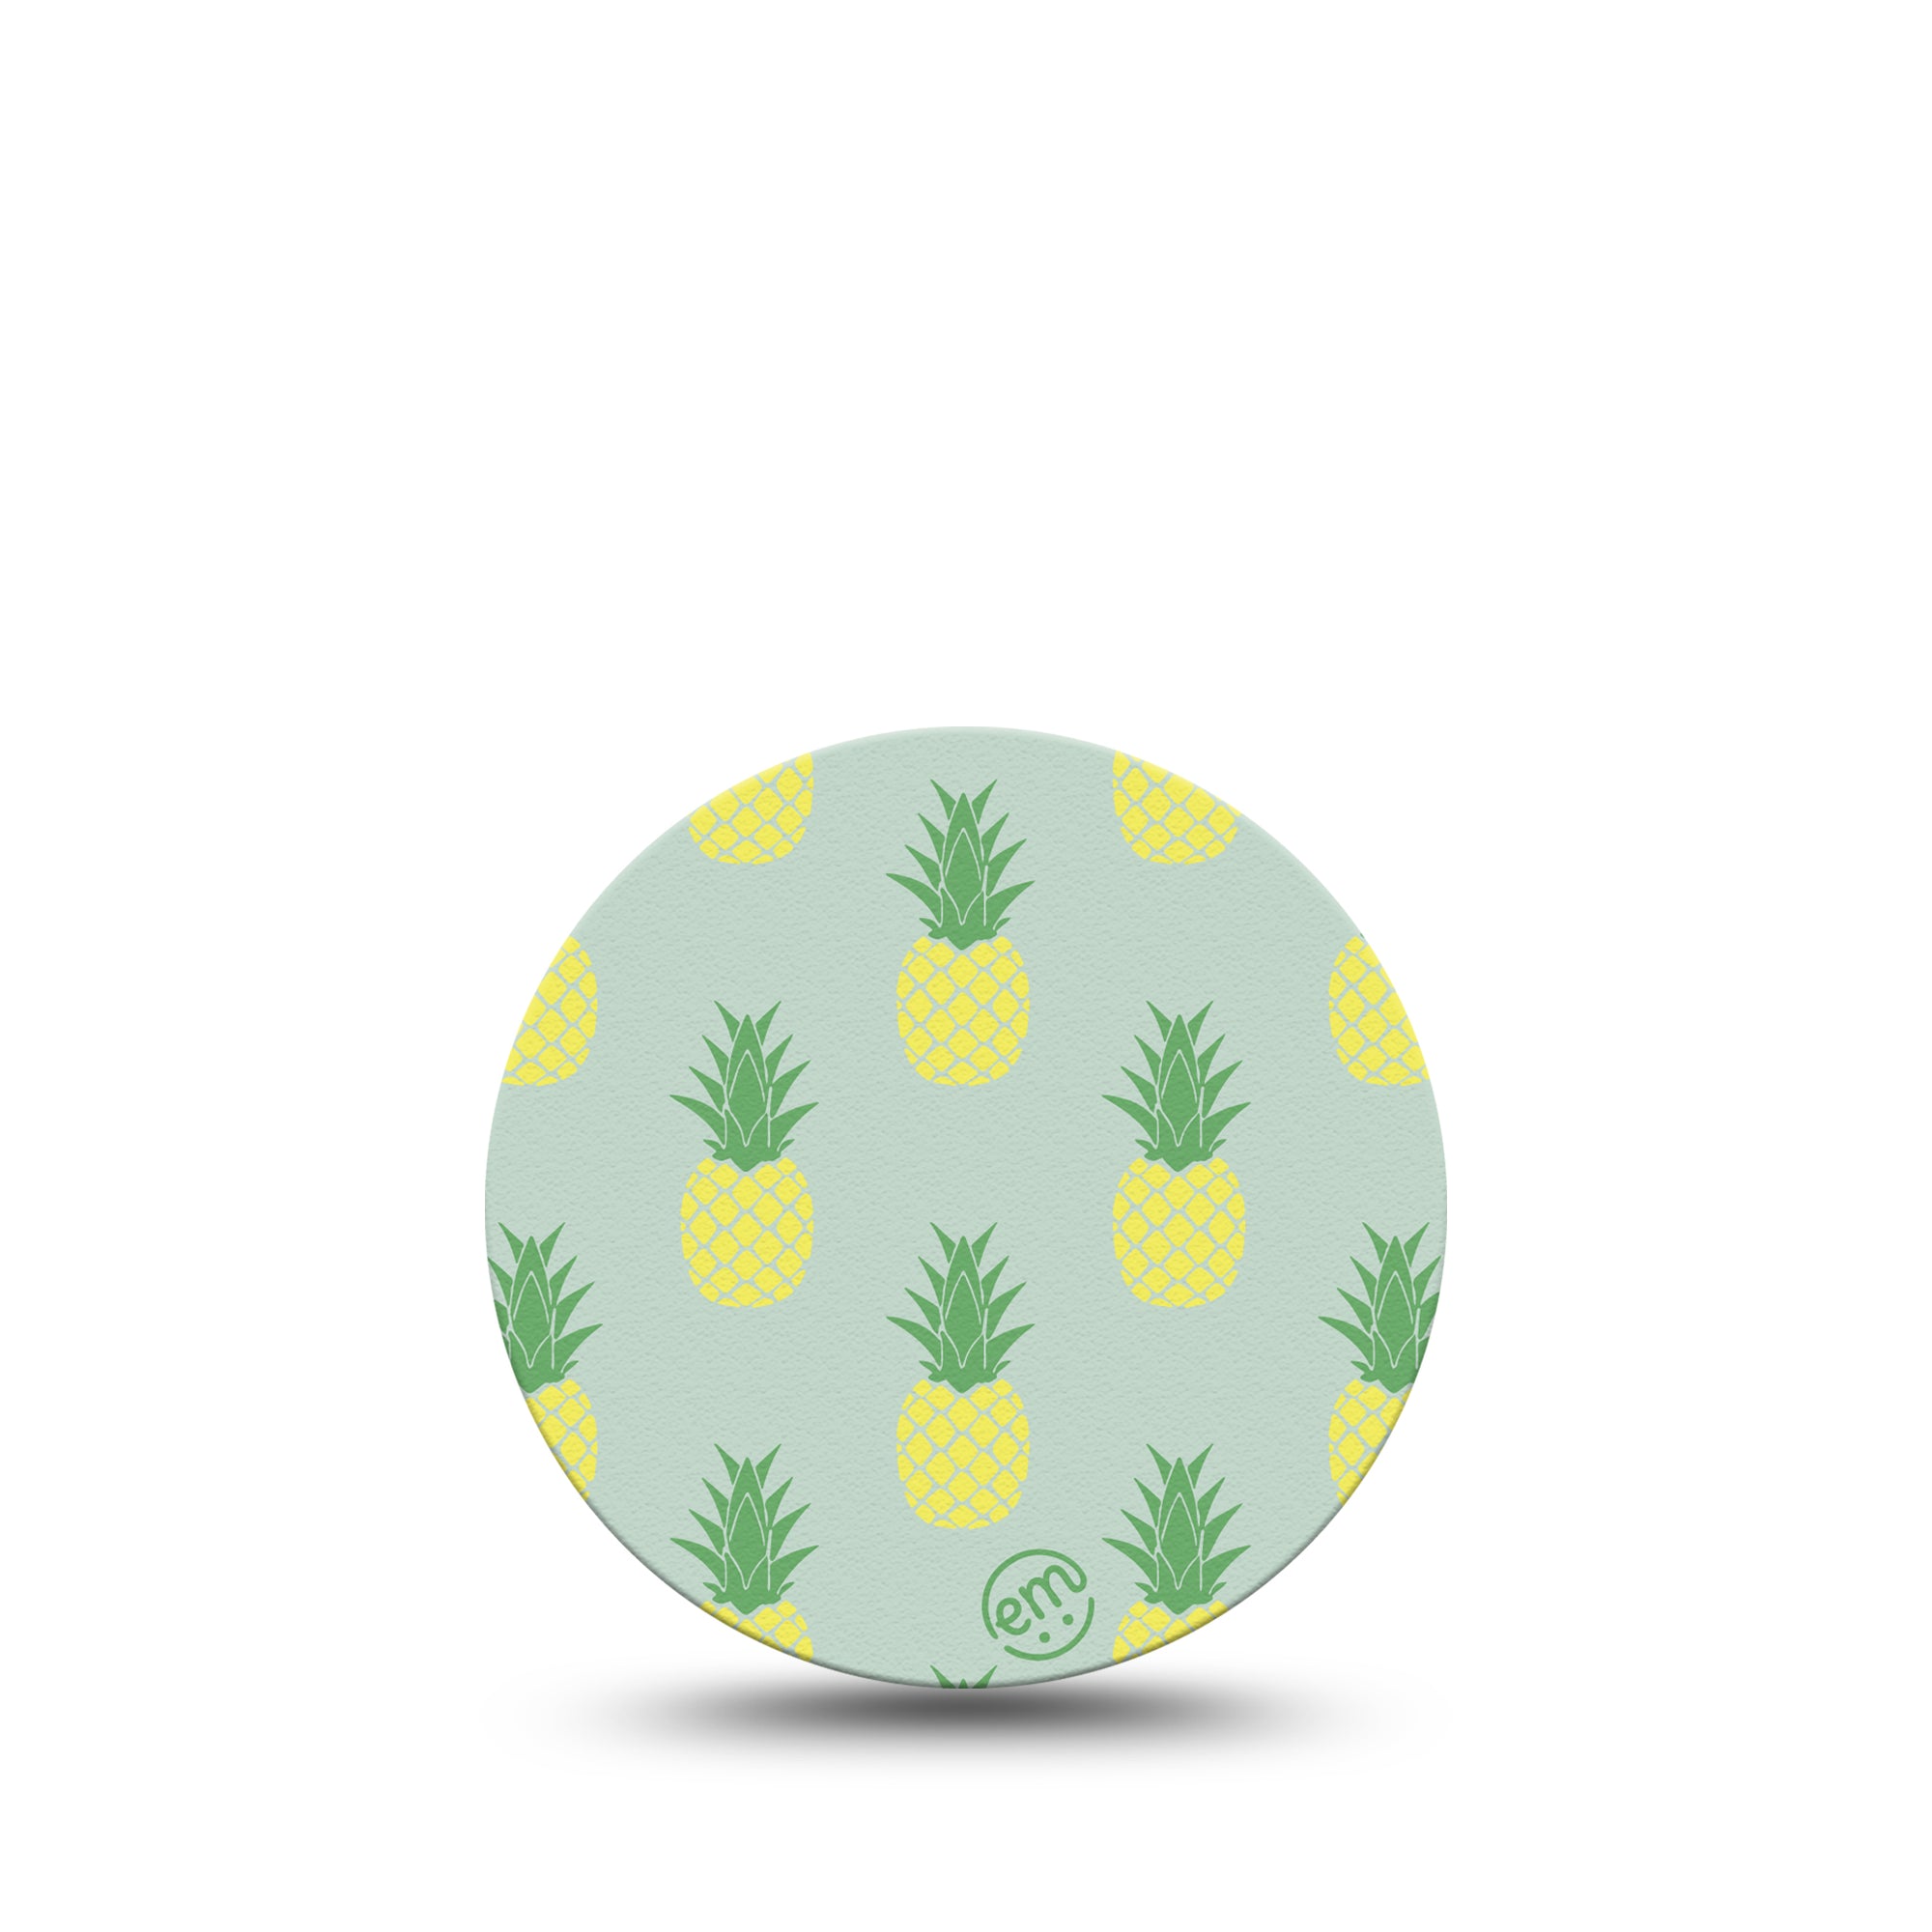 ExpressionMed Vintage Pineapple Libre 3 Overpatch, Single, Citrus Fruit Themed, CGM Adhesive Tape Design